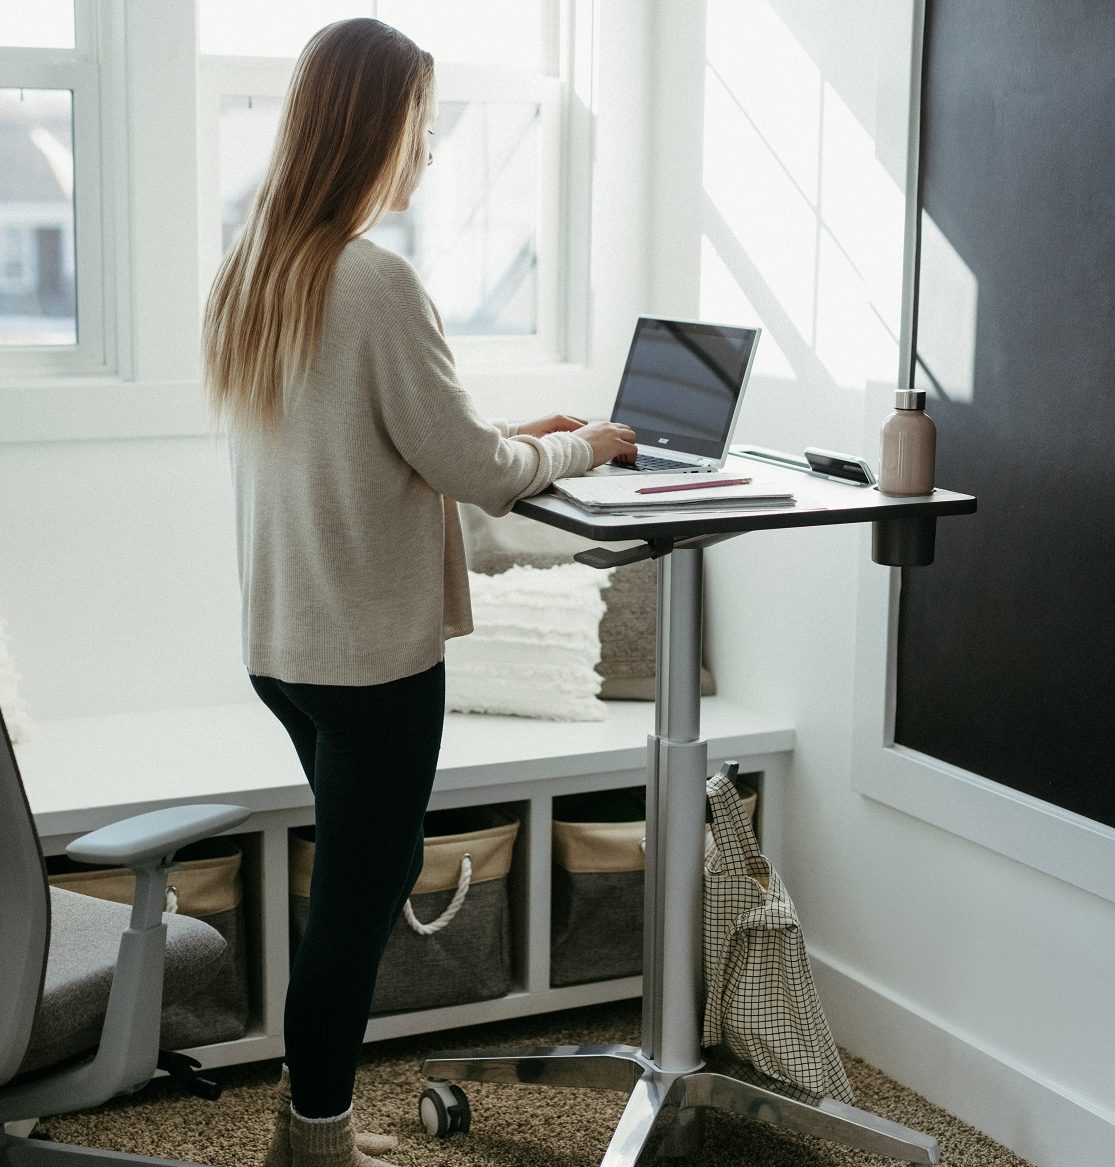 Young woman with long dirty-blonde hair, wearing black leggings, fuzzy socks and a comfy sweater is working on her laptop at home facing away from us, standing at Ergotron LearnFit Sit Stand Desk Mobile Cart. Light pours in from window.